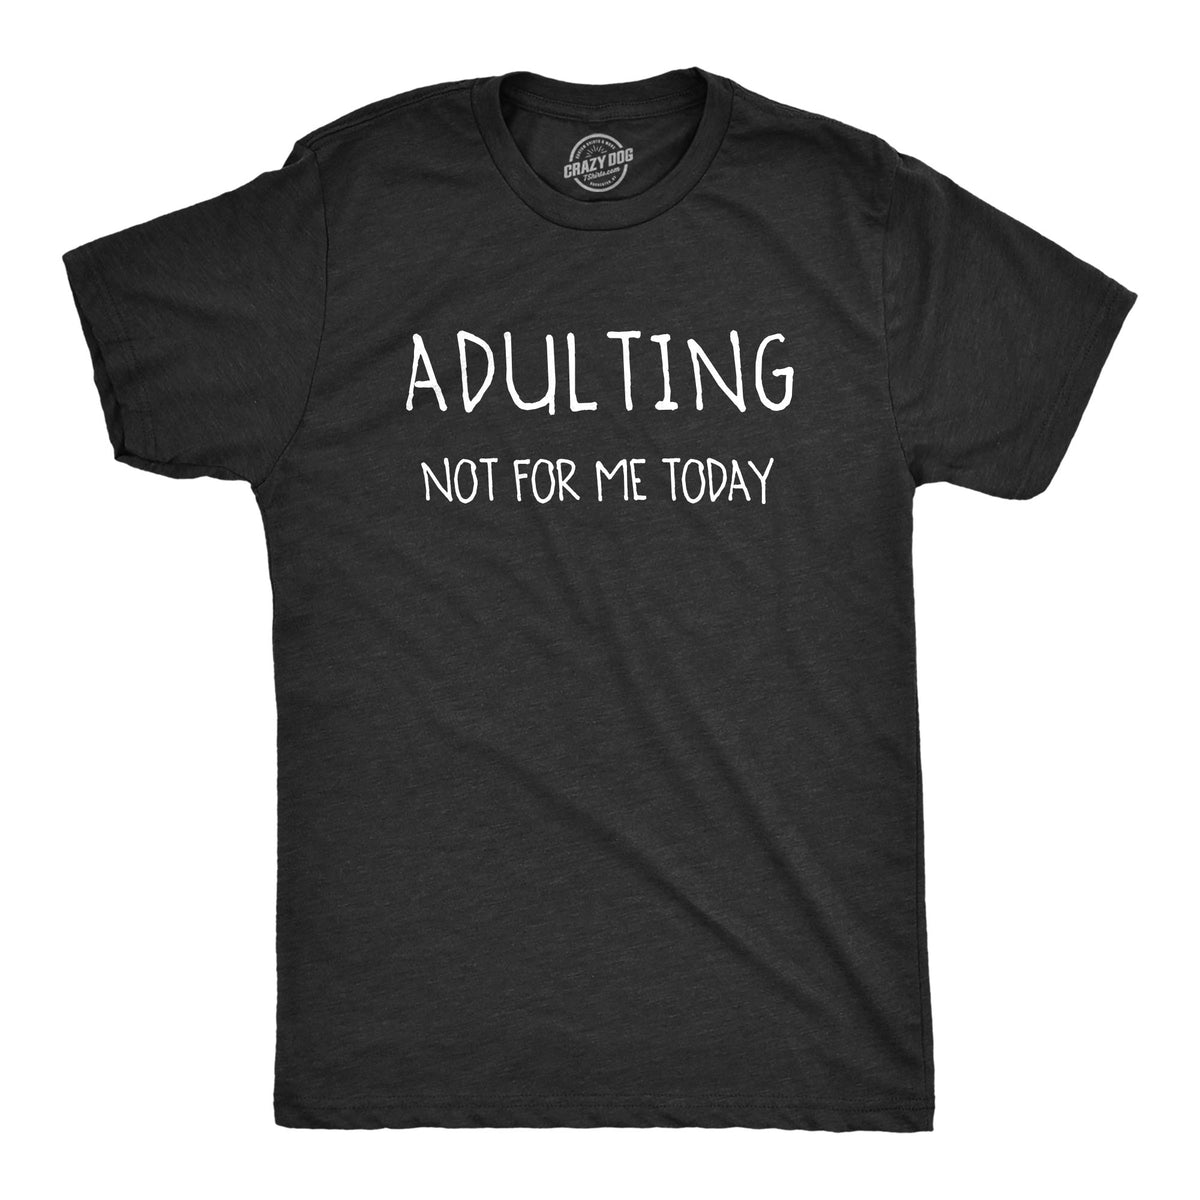 Funny Heather Black Adulting Not For Me Mens T Shirt Nerdy Sarcastic Tee